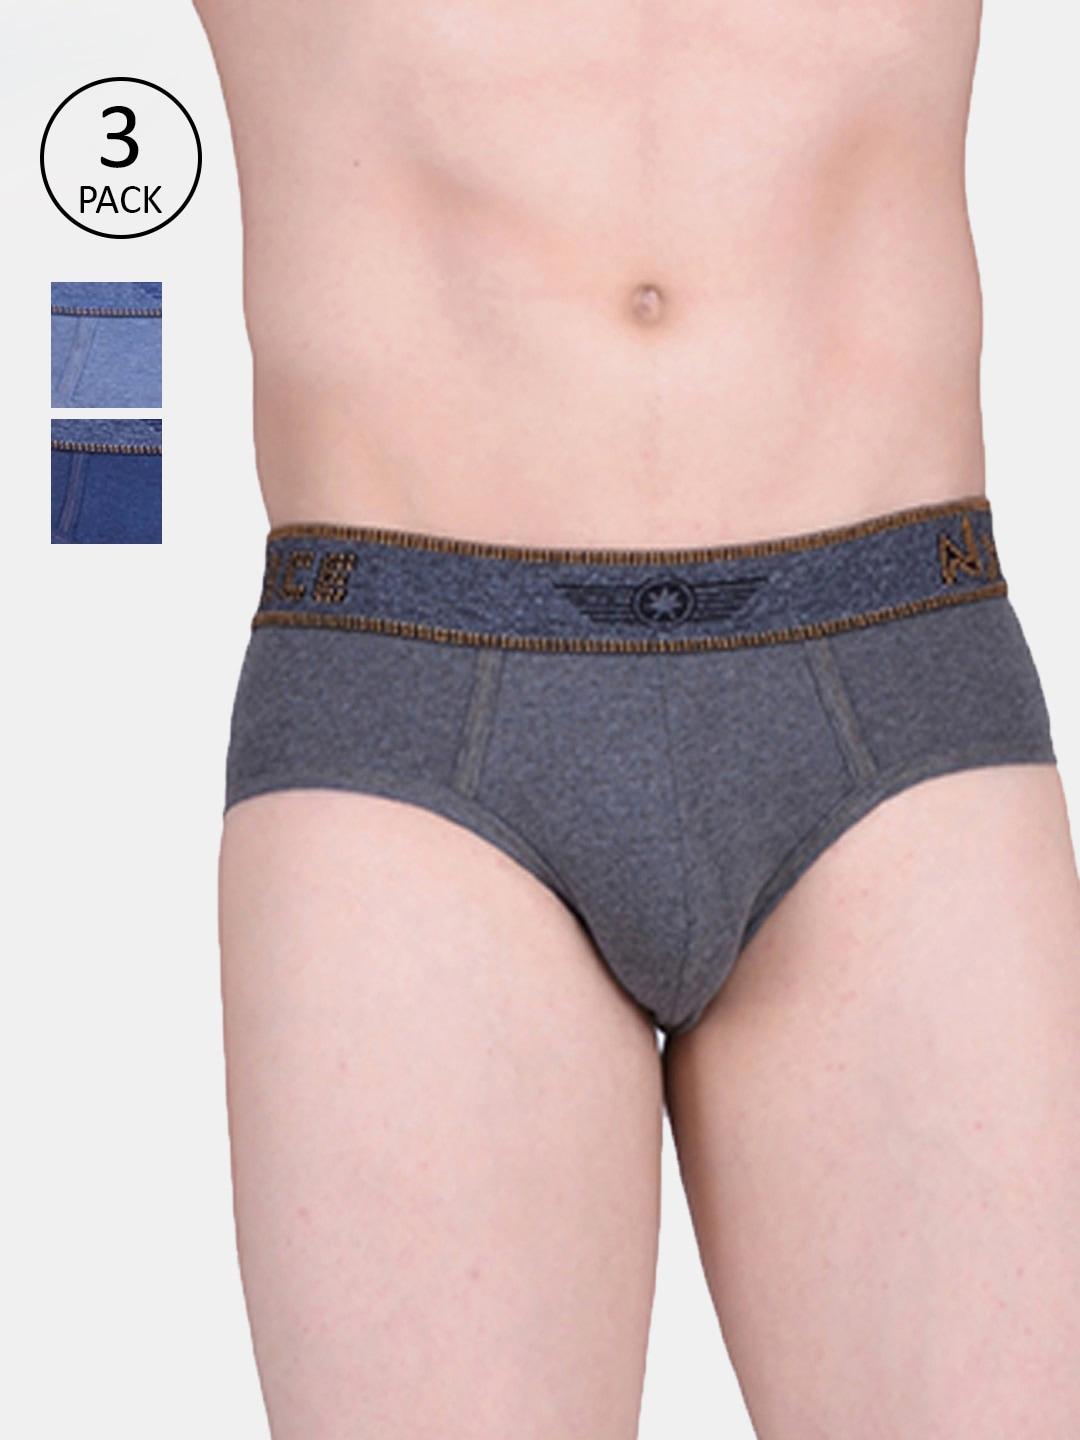 force-nxt-men-pack-of-3-assorted-basic-briefs-mnfl-53-po3